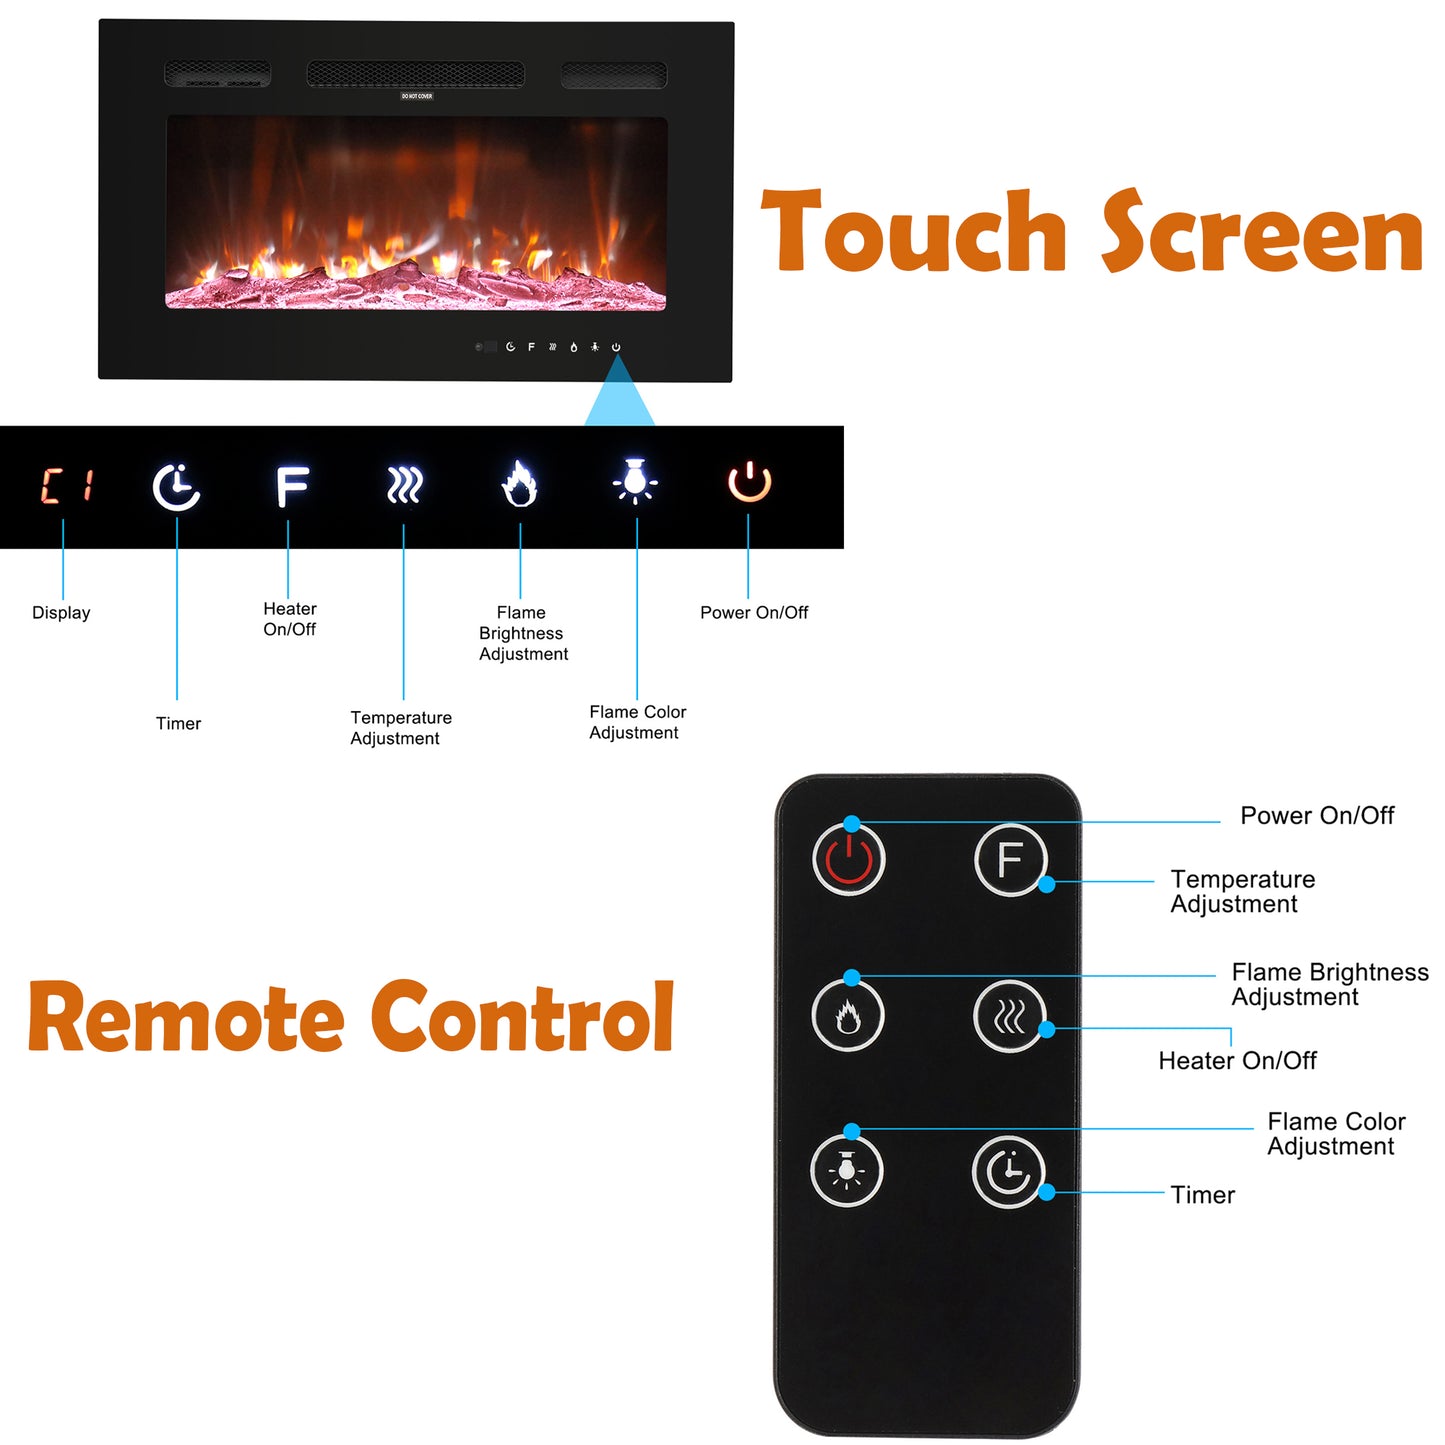 Wall Mounted Fireplace, 30 inch Electric Wall Fireplace, 10 Color Flame Settings, 750-1500 Watt Heater, Electric Fireplace w/ Console & Remote Control with Timer, Adjustable Flame Level, Black, C19